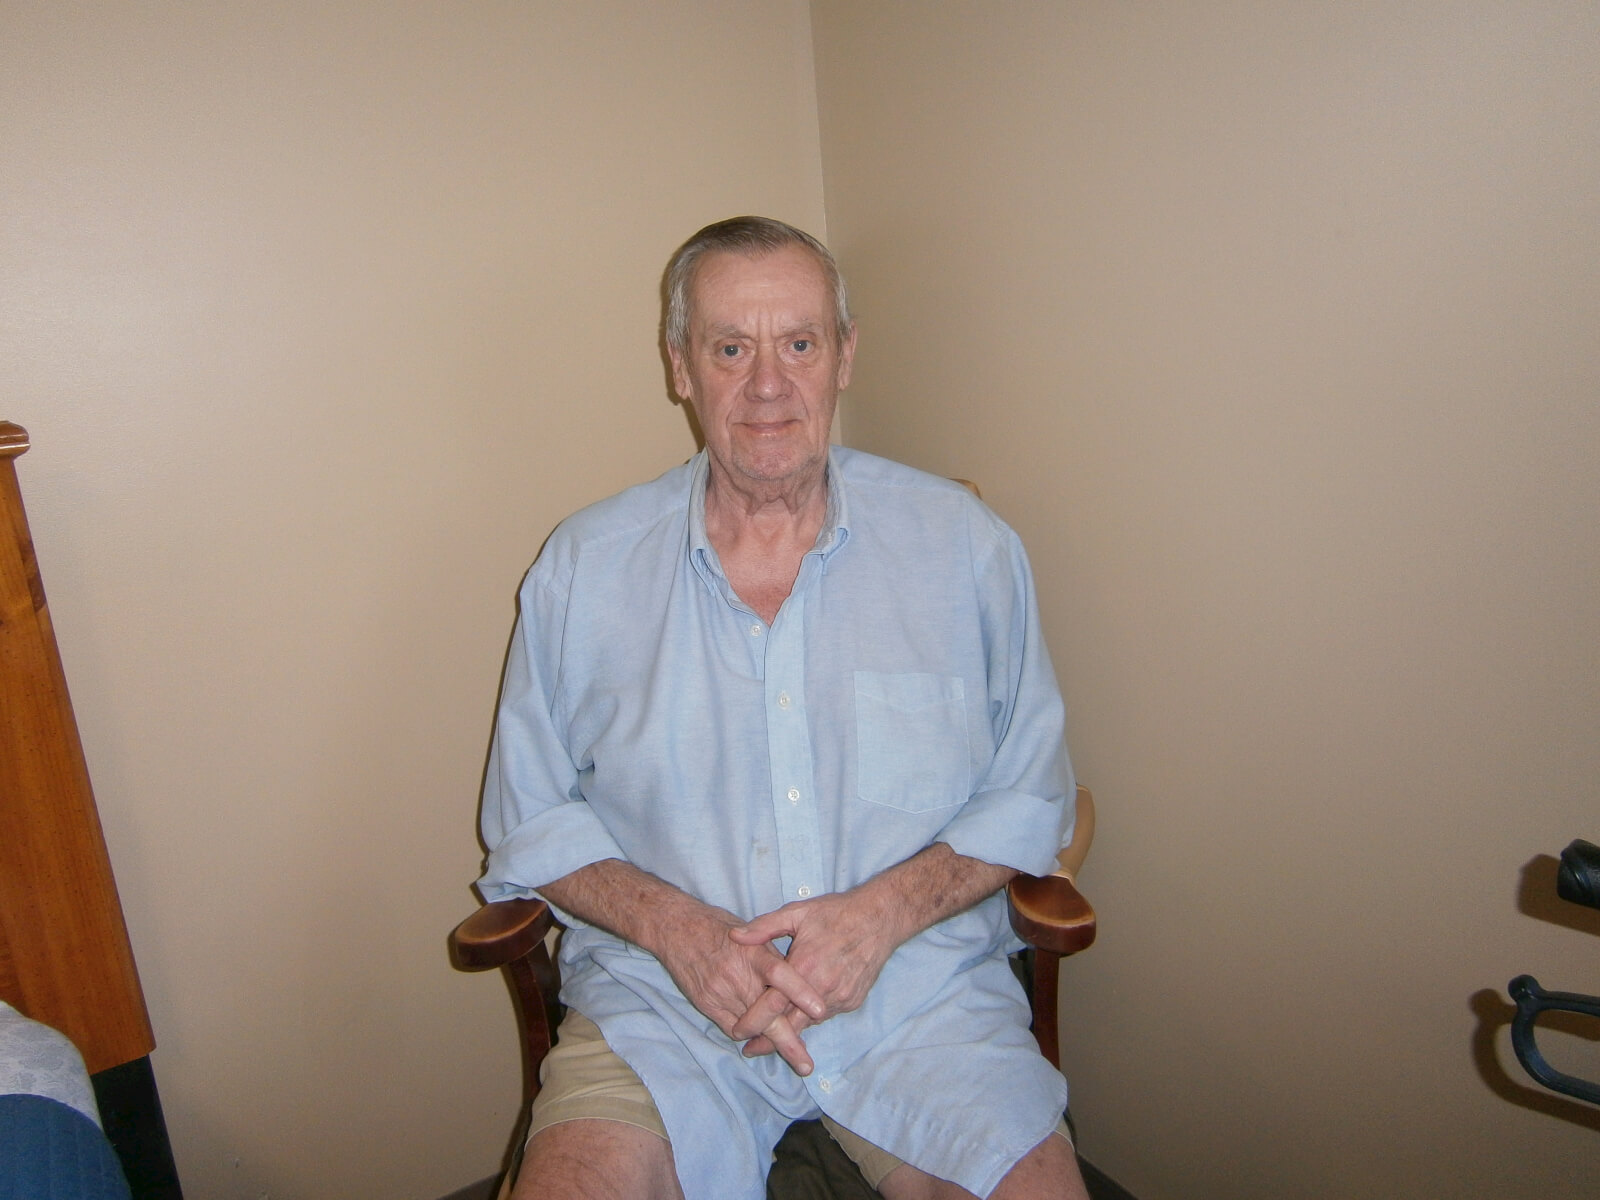 Frank Courson, a resident of Wexford House, a DePaul Senior Living Community